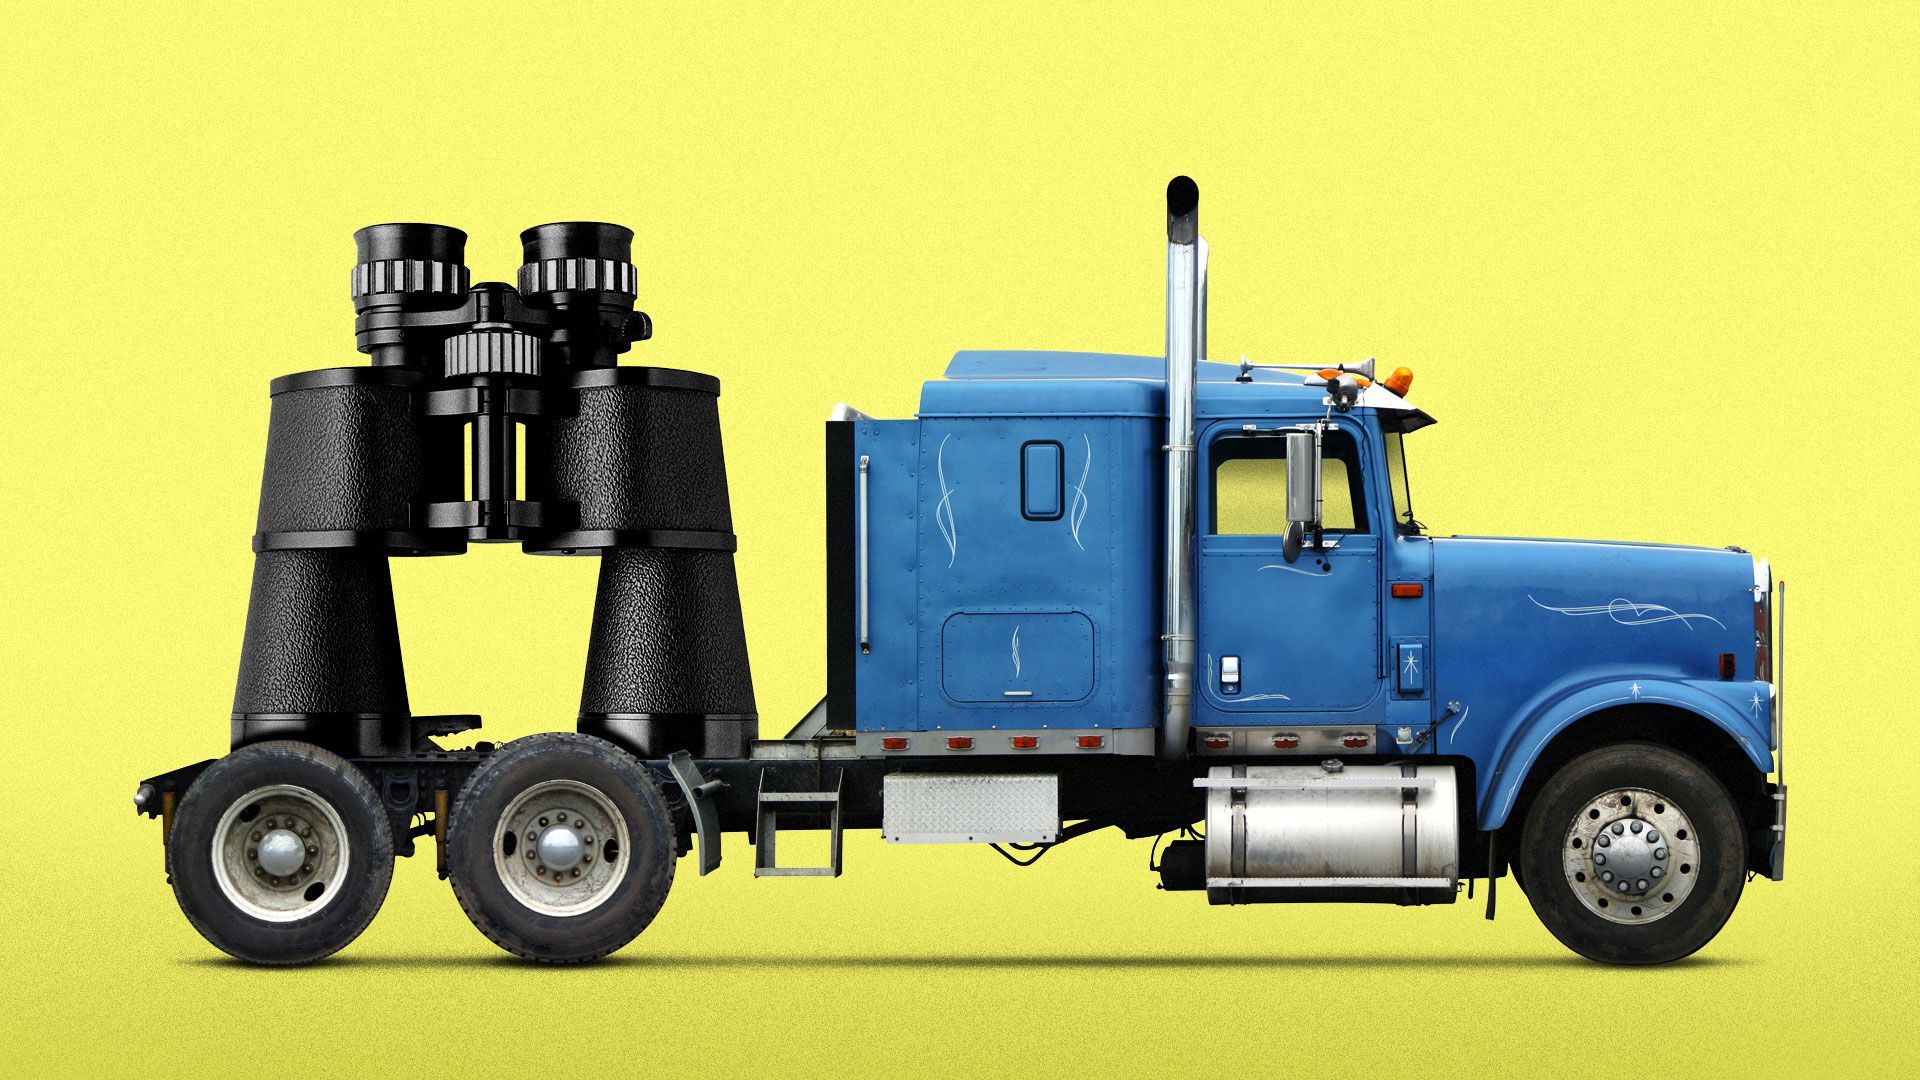 Illustration of a tractor trailer hauling a huge pair of binoculars.